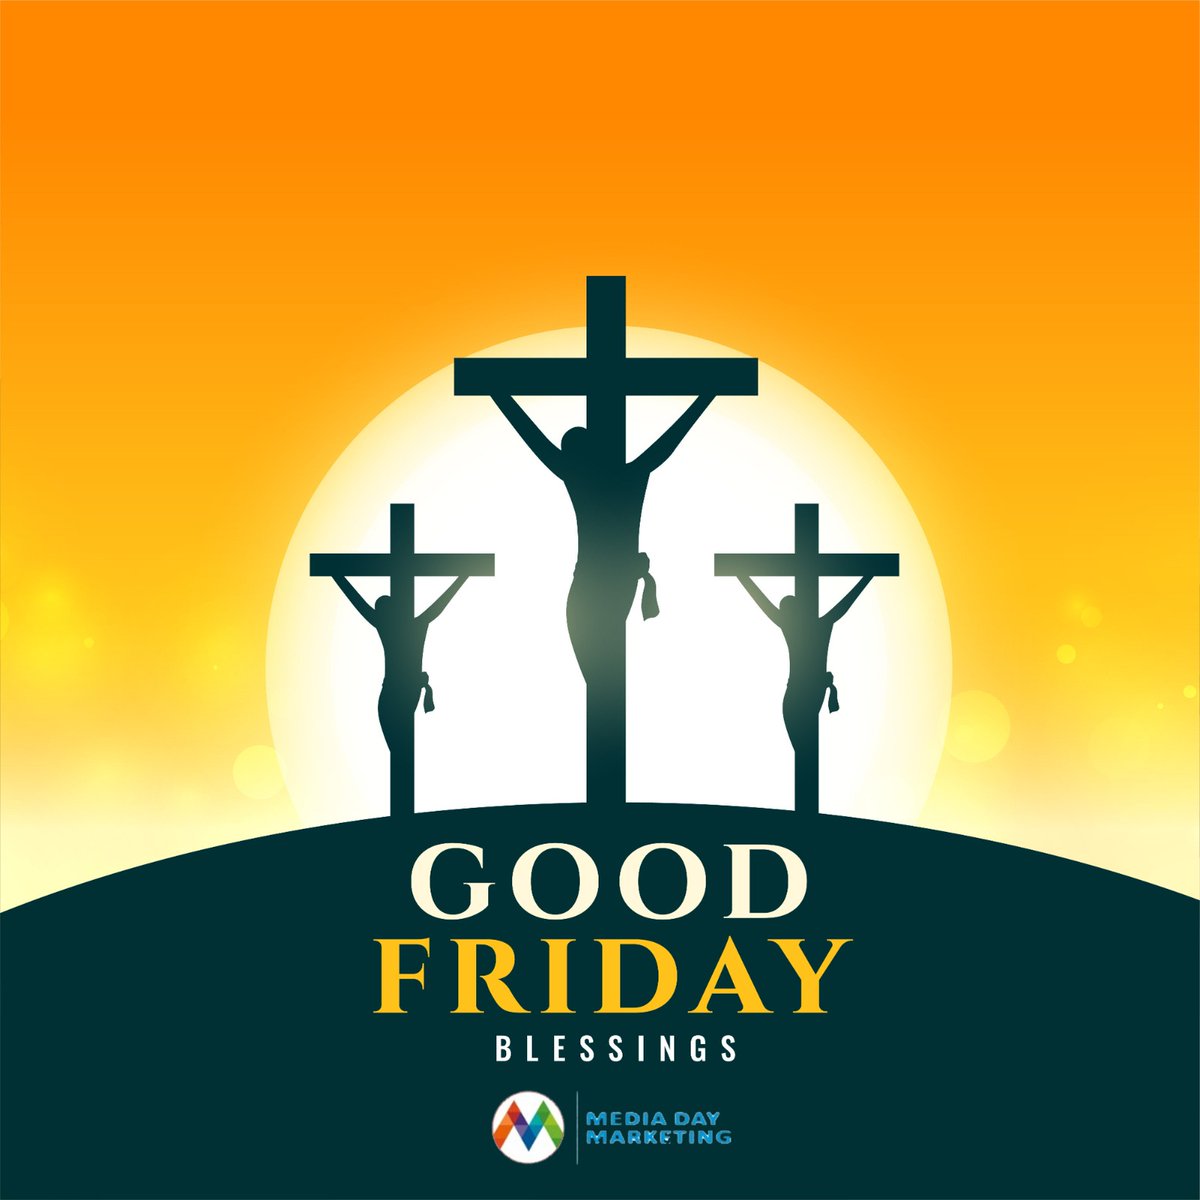 'Wishing everyone a reflective and blessed Good Friday. May this solemn day remind us of the sacrifice and love that guides us towards compassion and renewal. 🙏 #GoodFriday #EasterWeekend #MohamedMediaBuzz